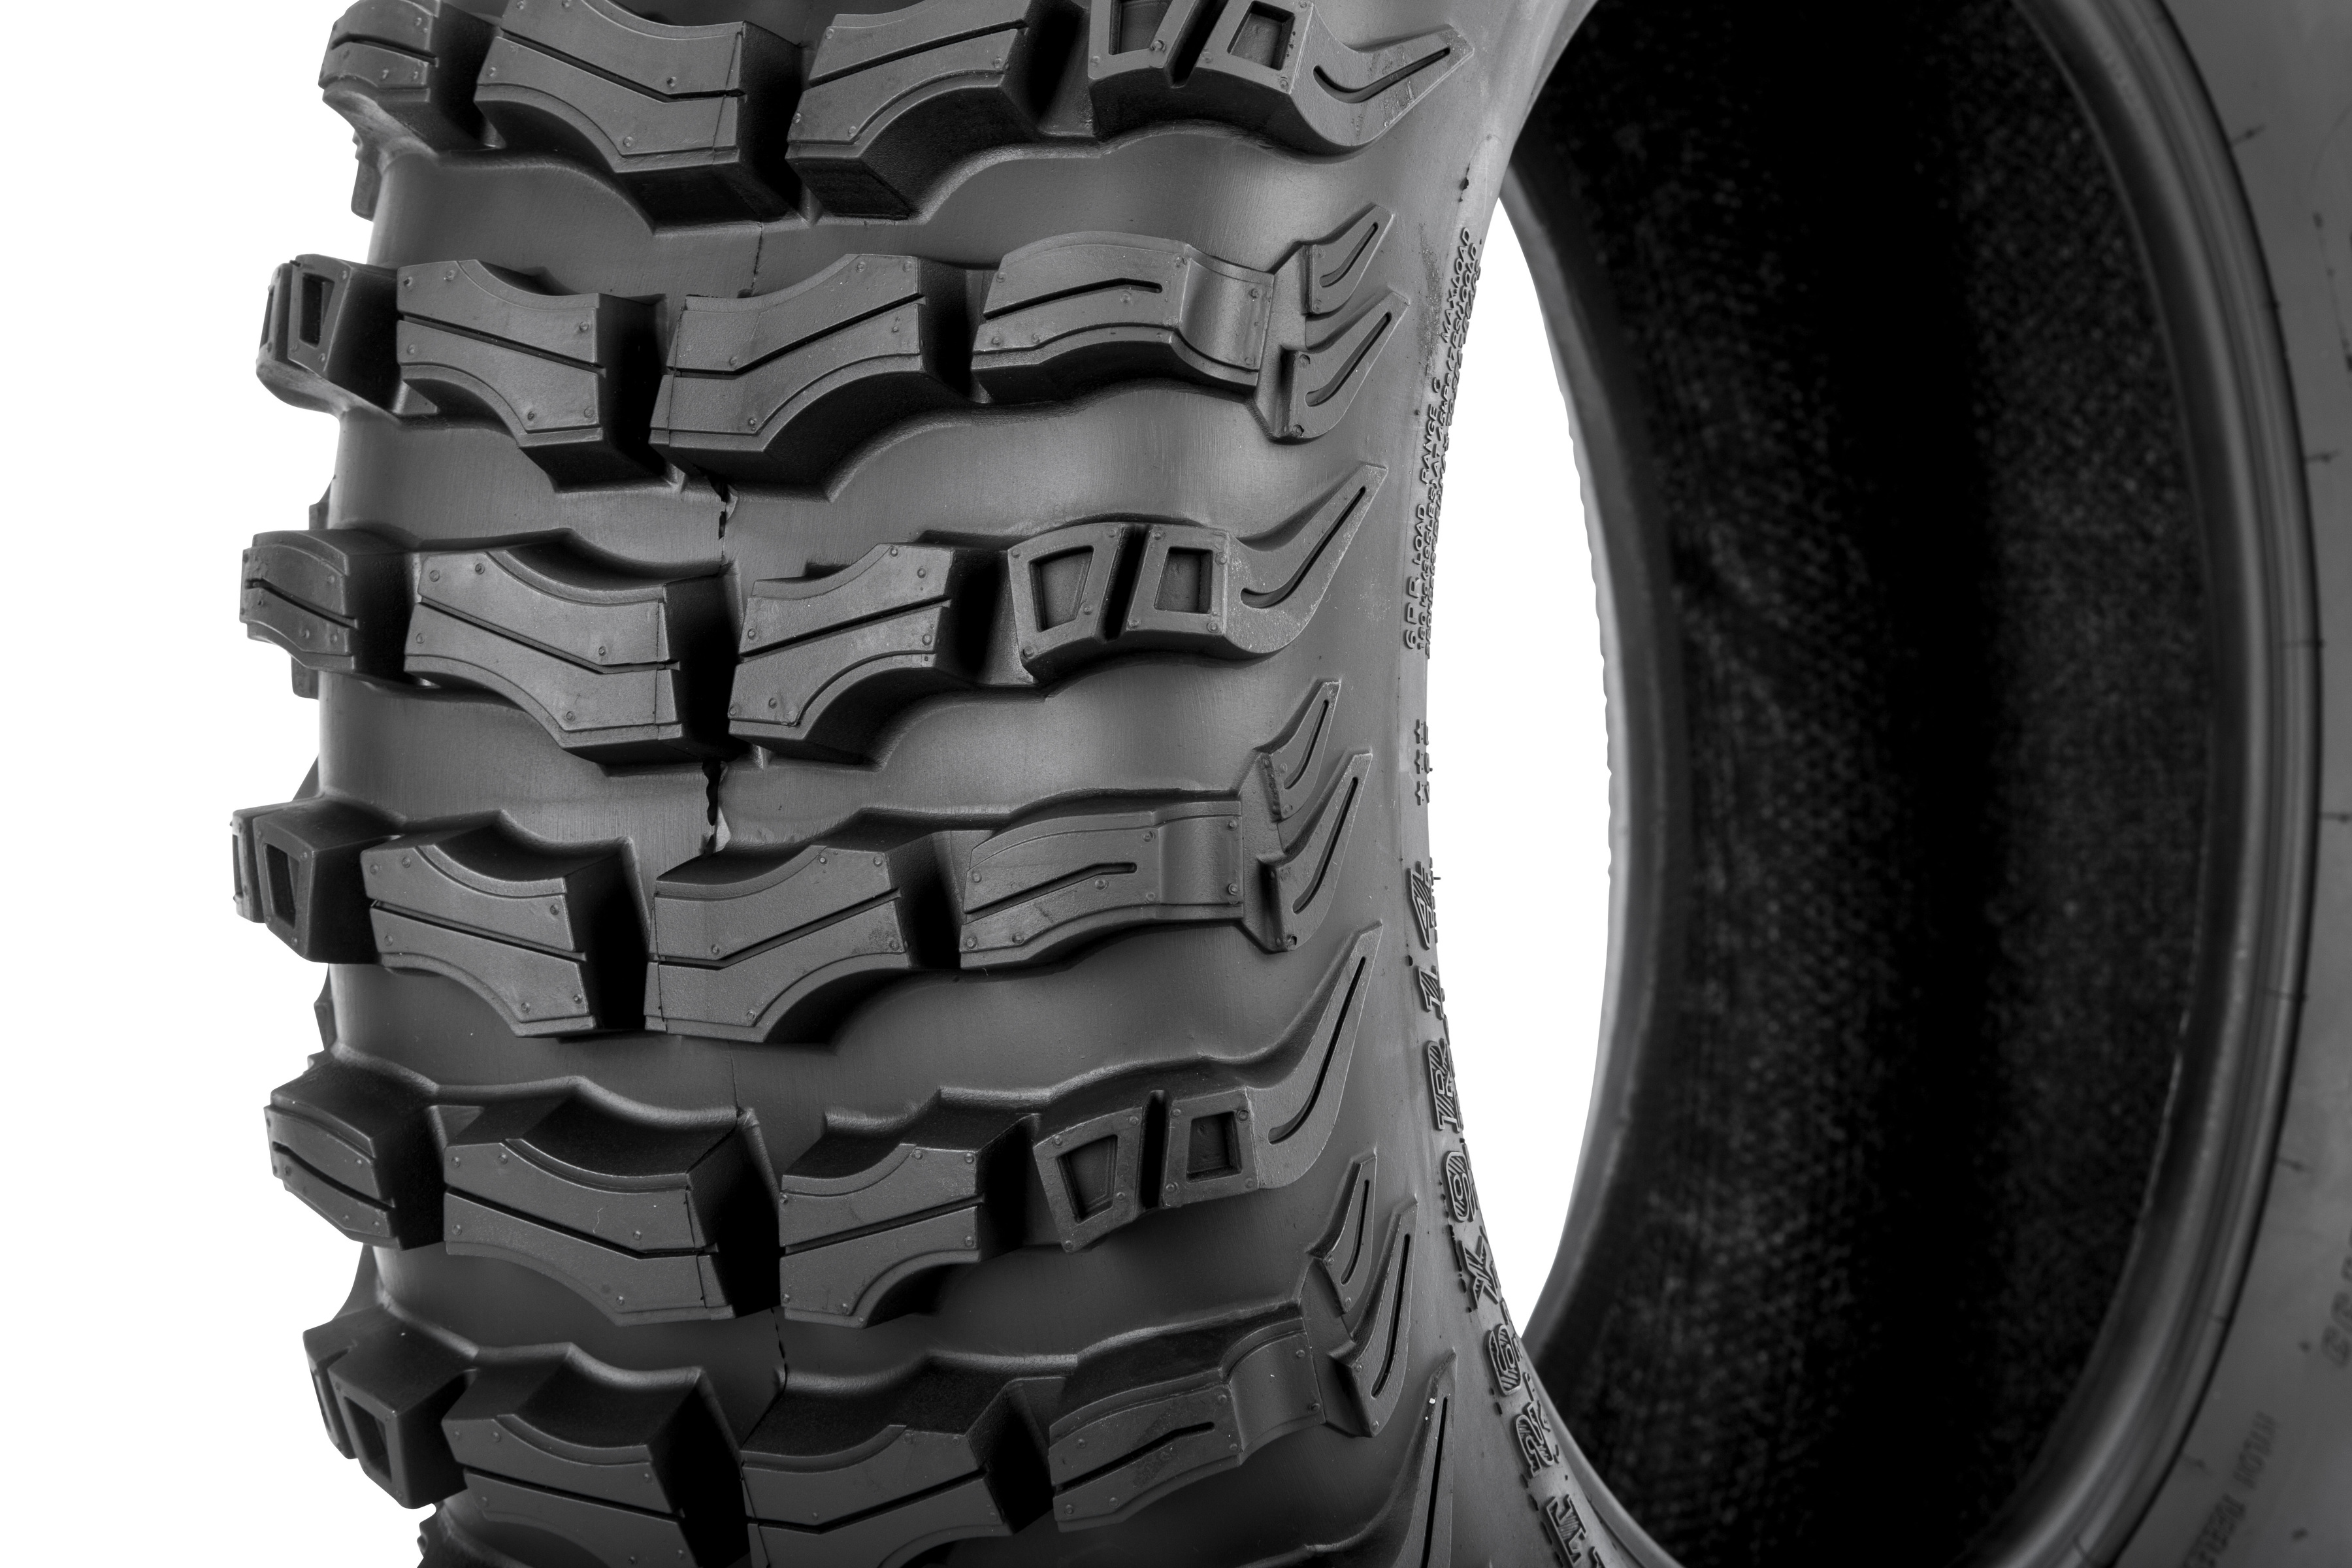 25X8Rx12 Buzz Saw R/T Tire - Click Image to Close